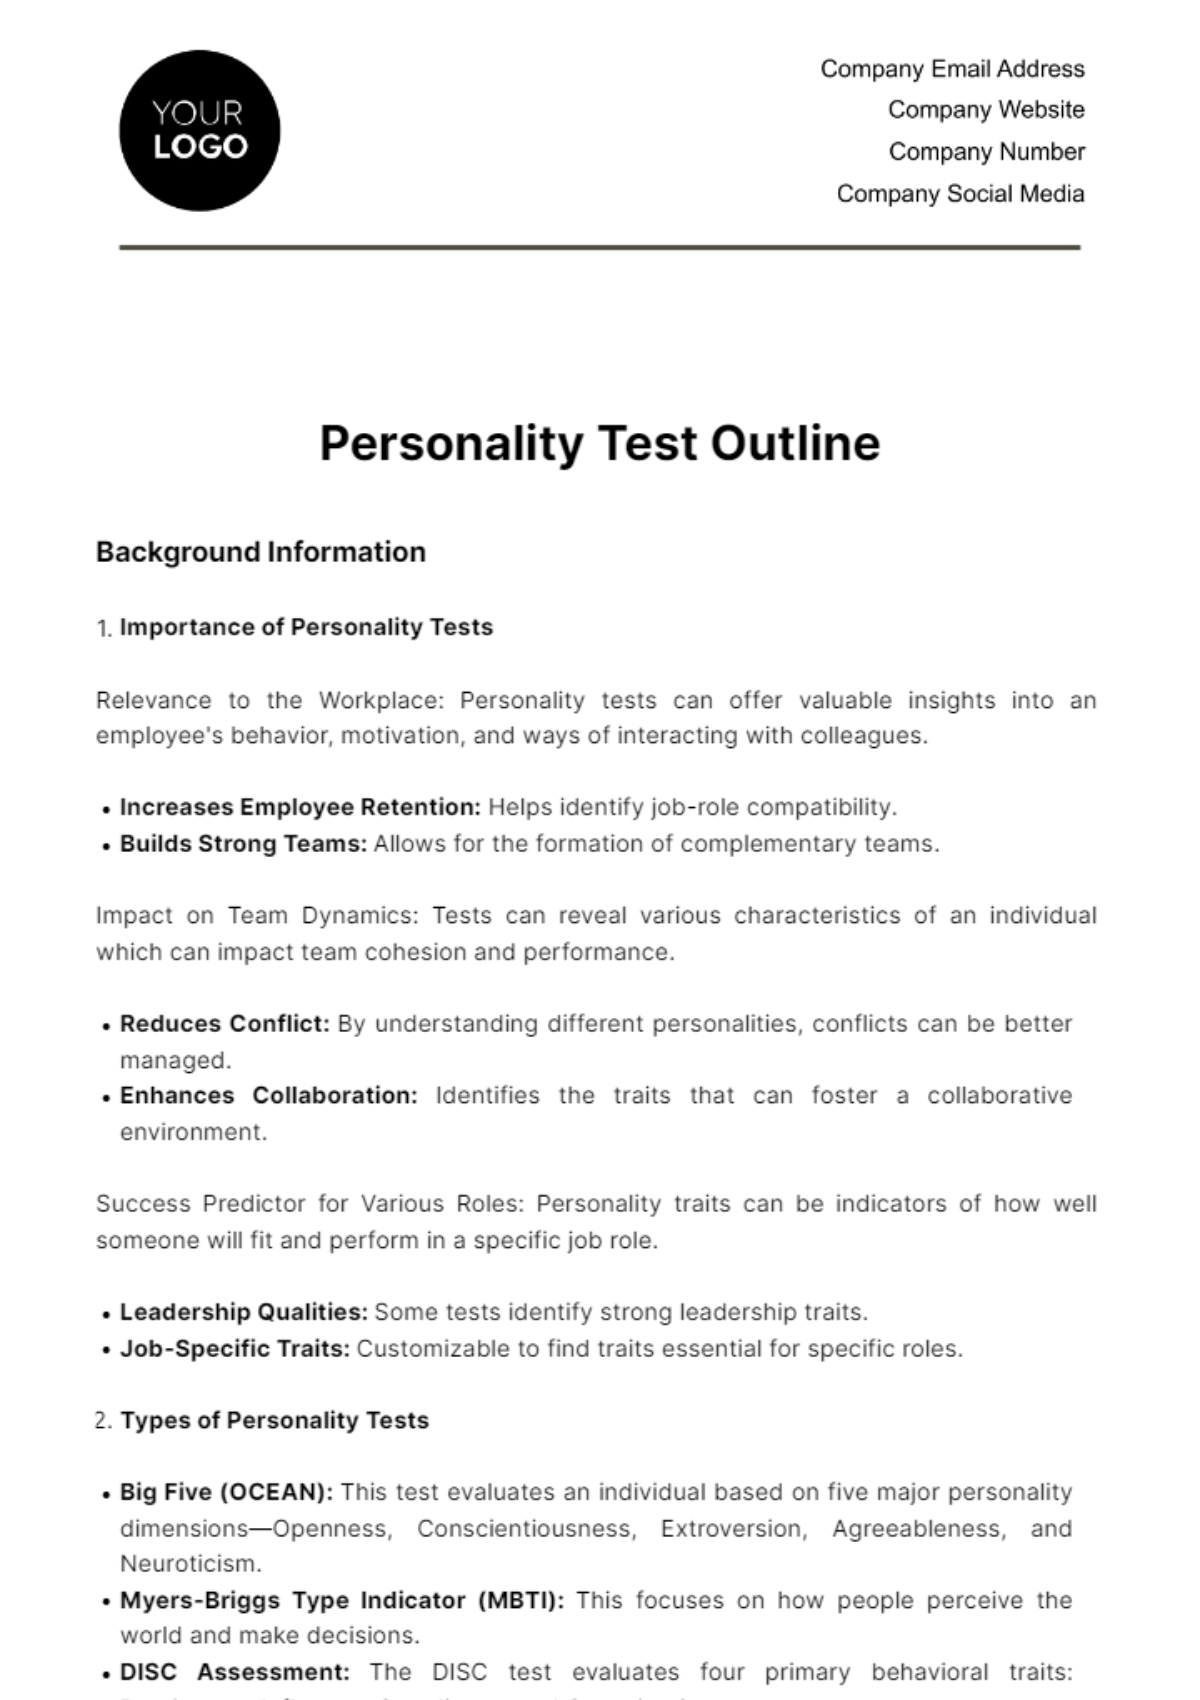 Free Personality Test Outline HR Template